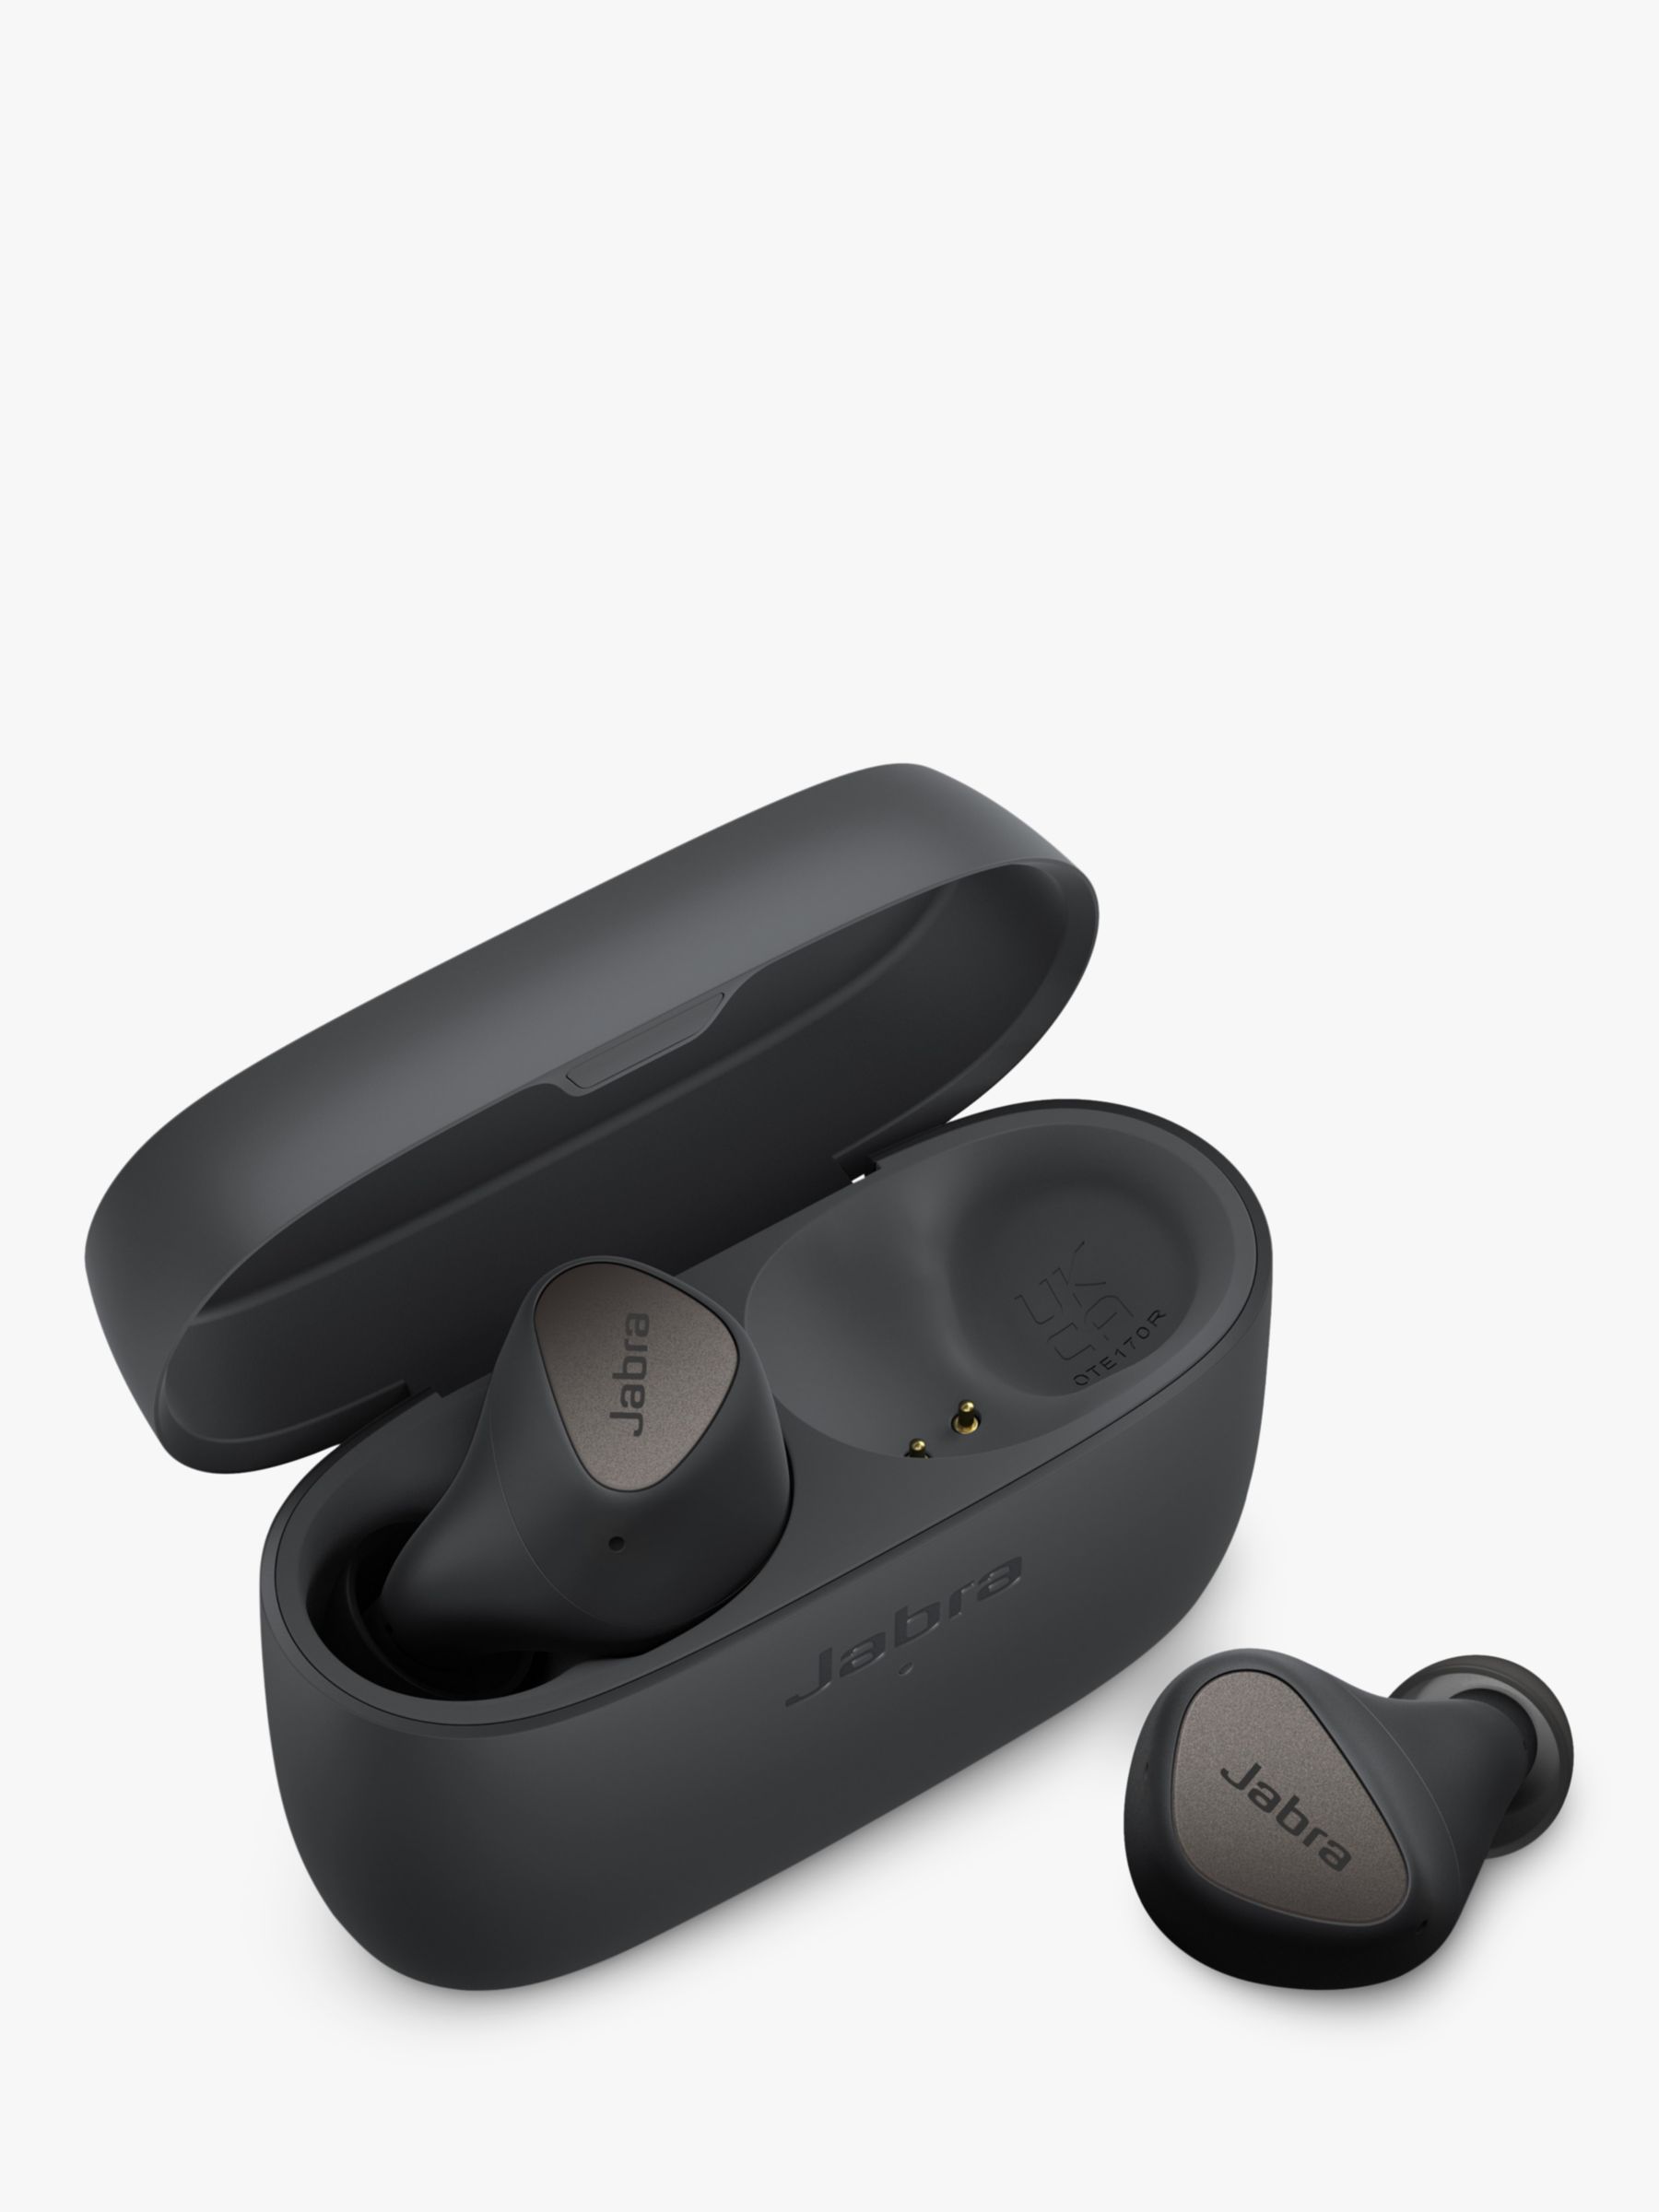 Jabra Elite 4 Active in-Ear Bluetooth Earbuds, Noise Cancelling, Black 